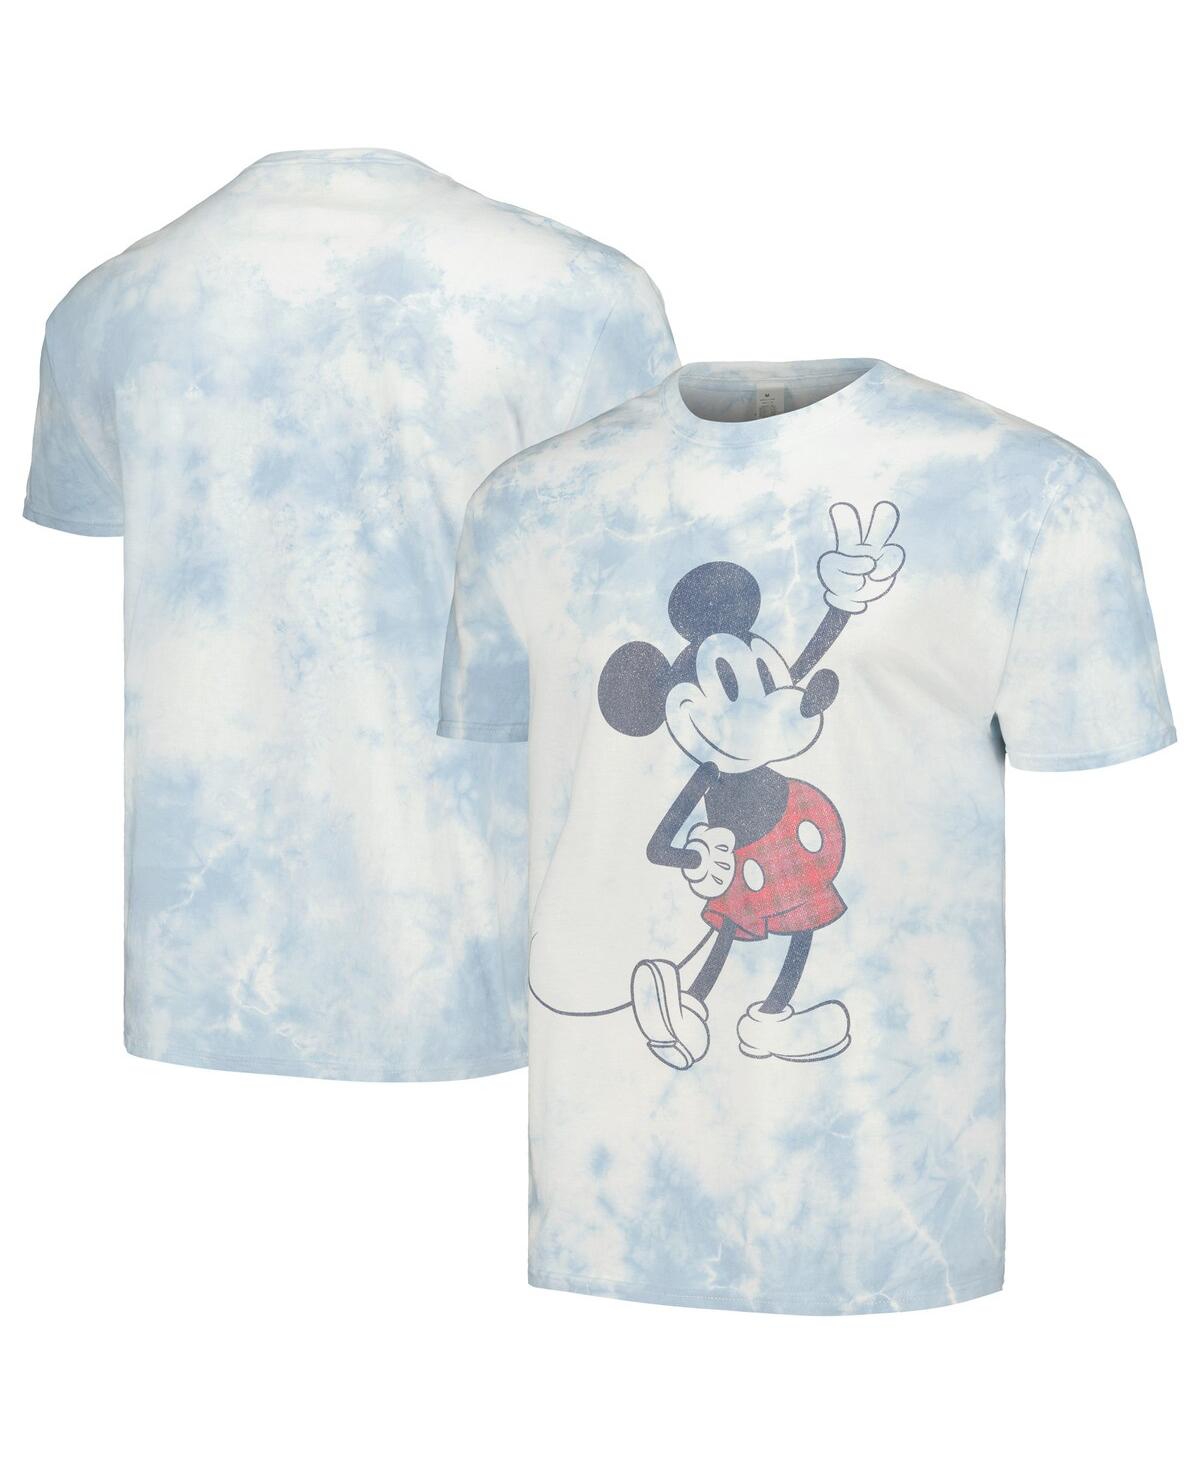 Mad Engine Men's And Women's White Mickey & Friends Plaid Graphic T-shirt